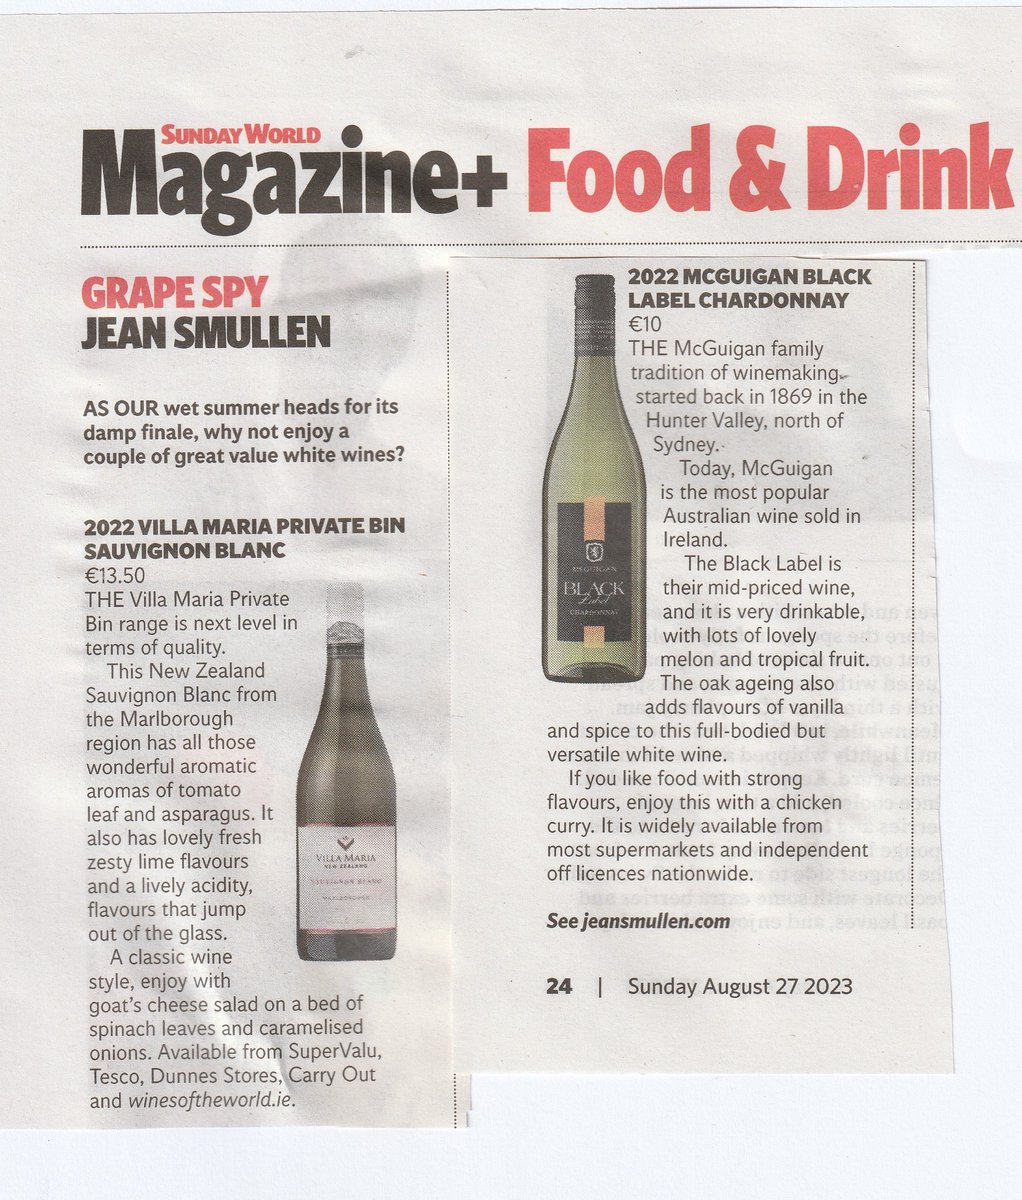 Grape Spy features refreshing whites for a damp weekend!